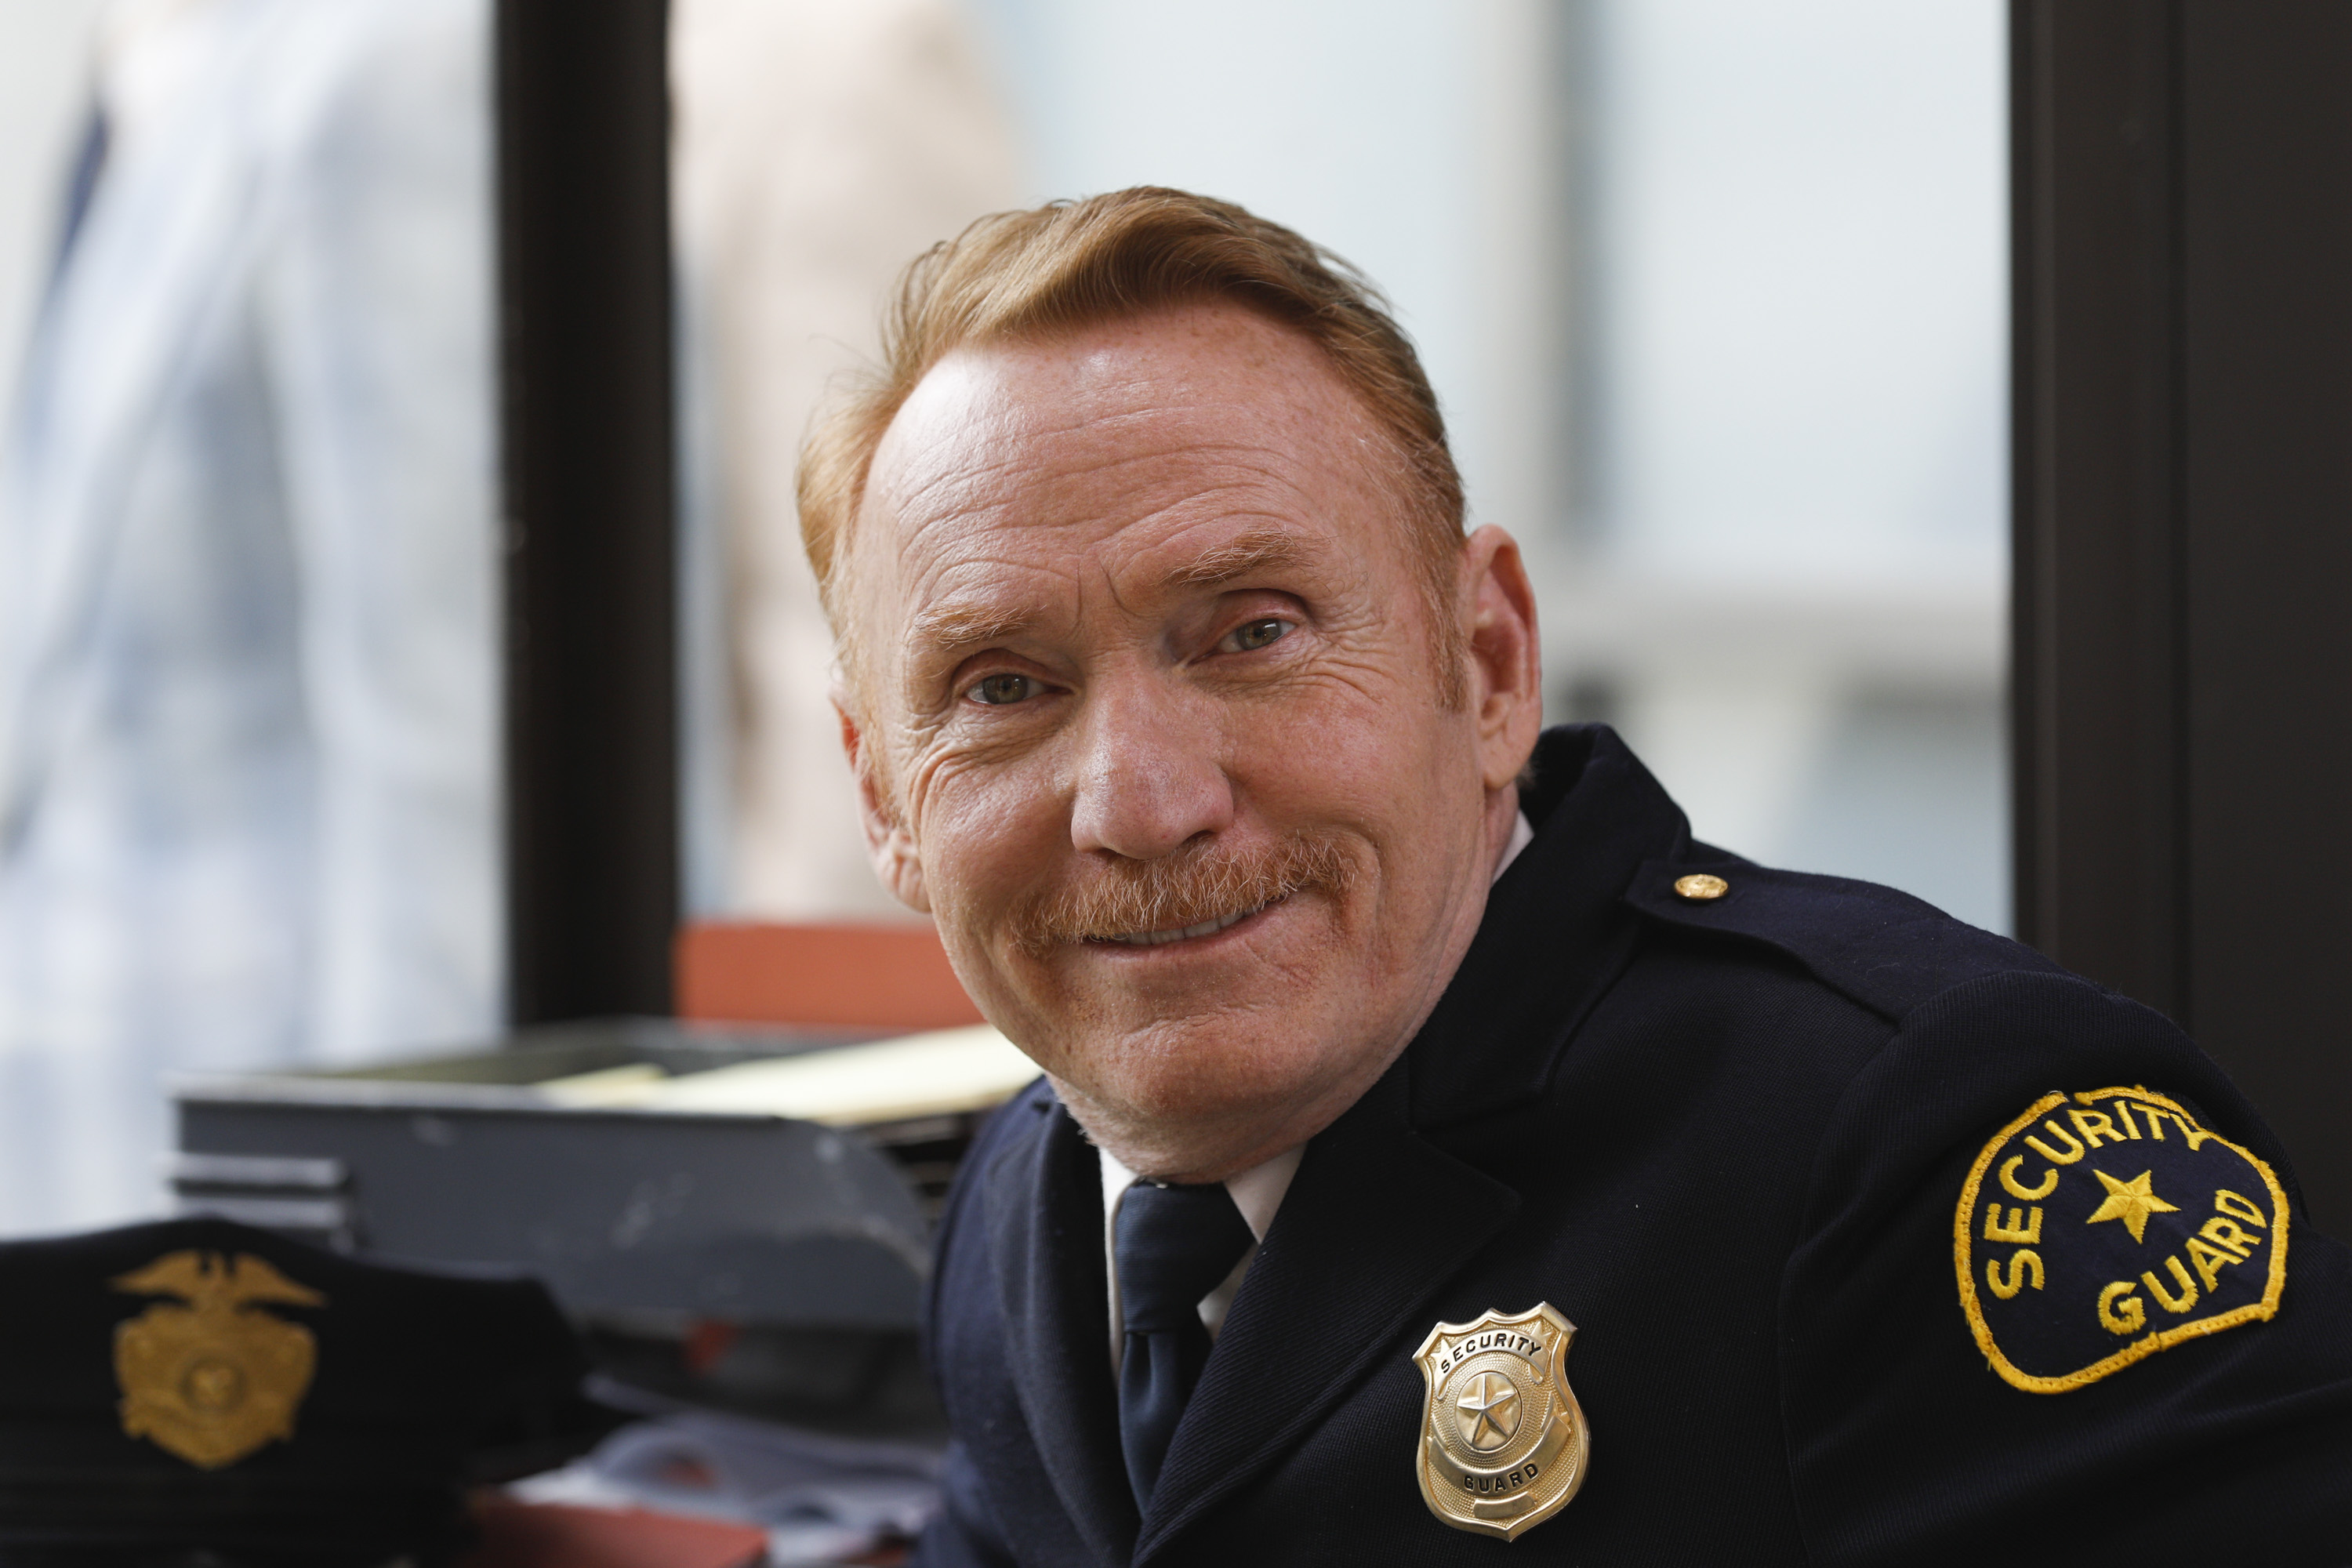 Danny Bonaduce as a guest star in the television series, "The Kids Are Alright" on February 27, 2019 | Source: Getty Images